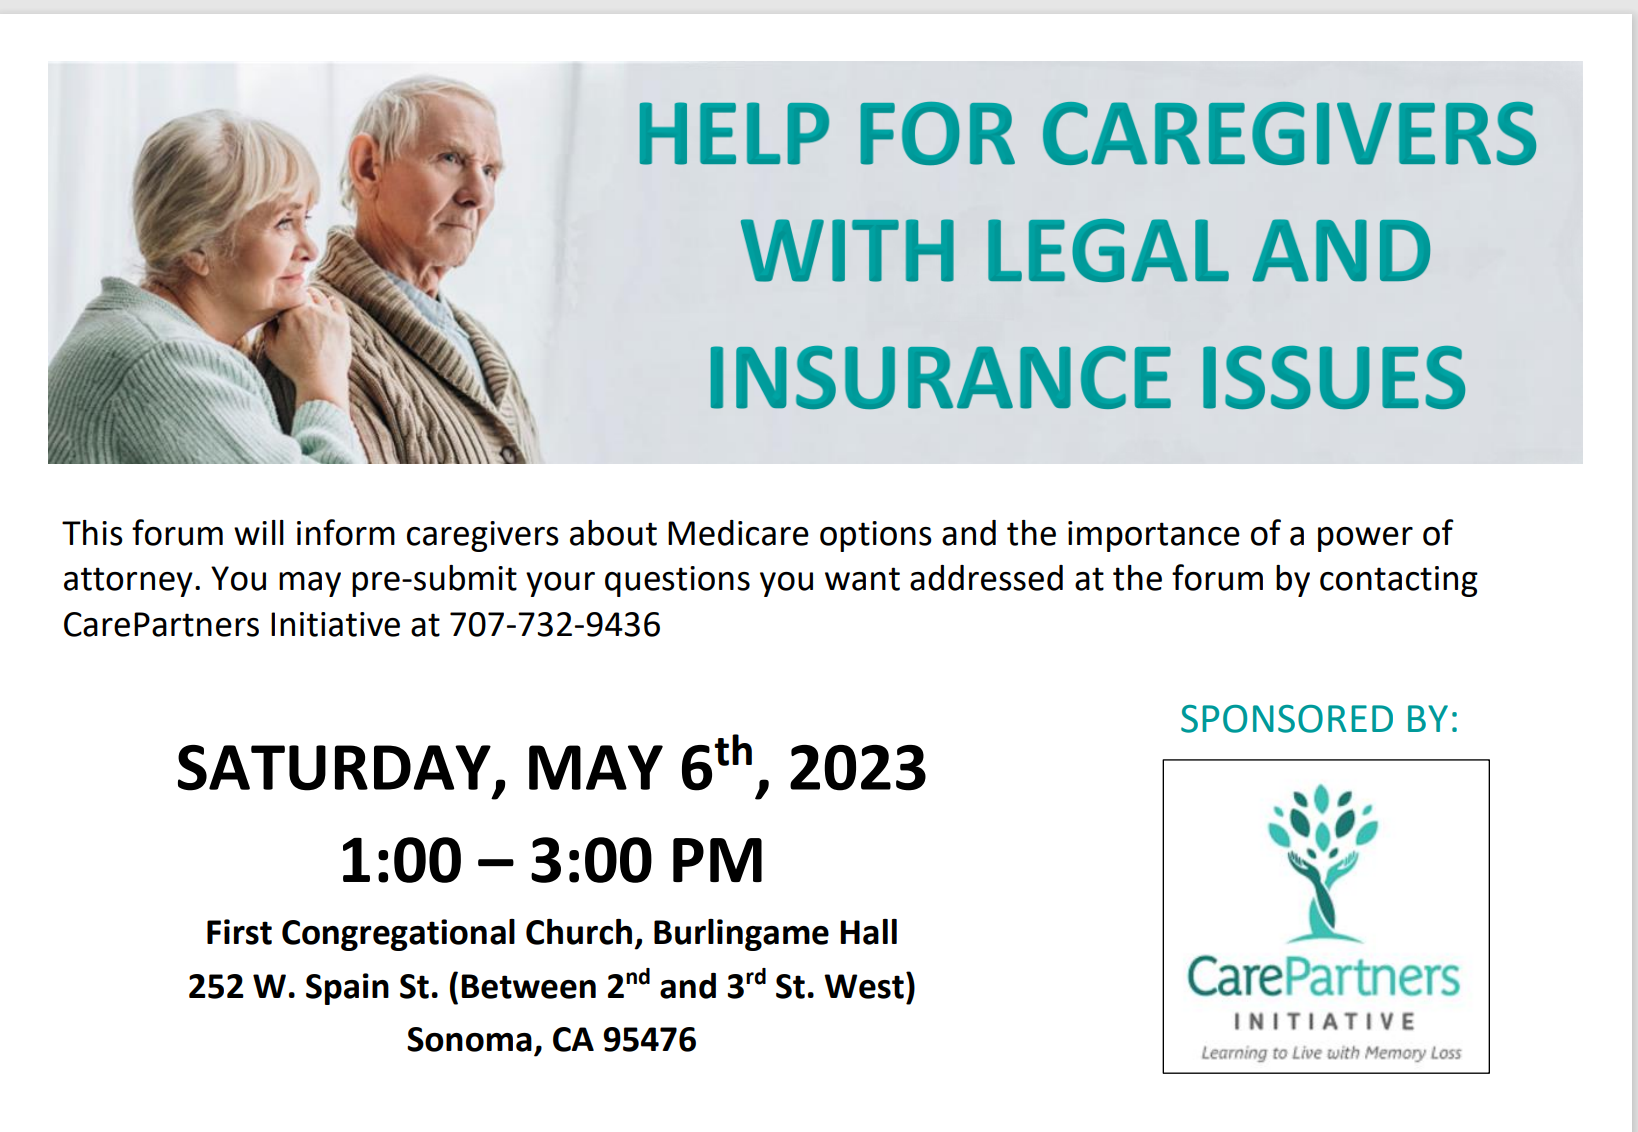 Help for Caregivers 2: Saturday May 6th, 2023 from 1:00PM to 3:00PM a breakdown of keynote speakers.